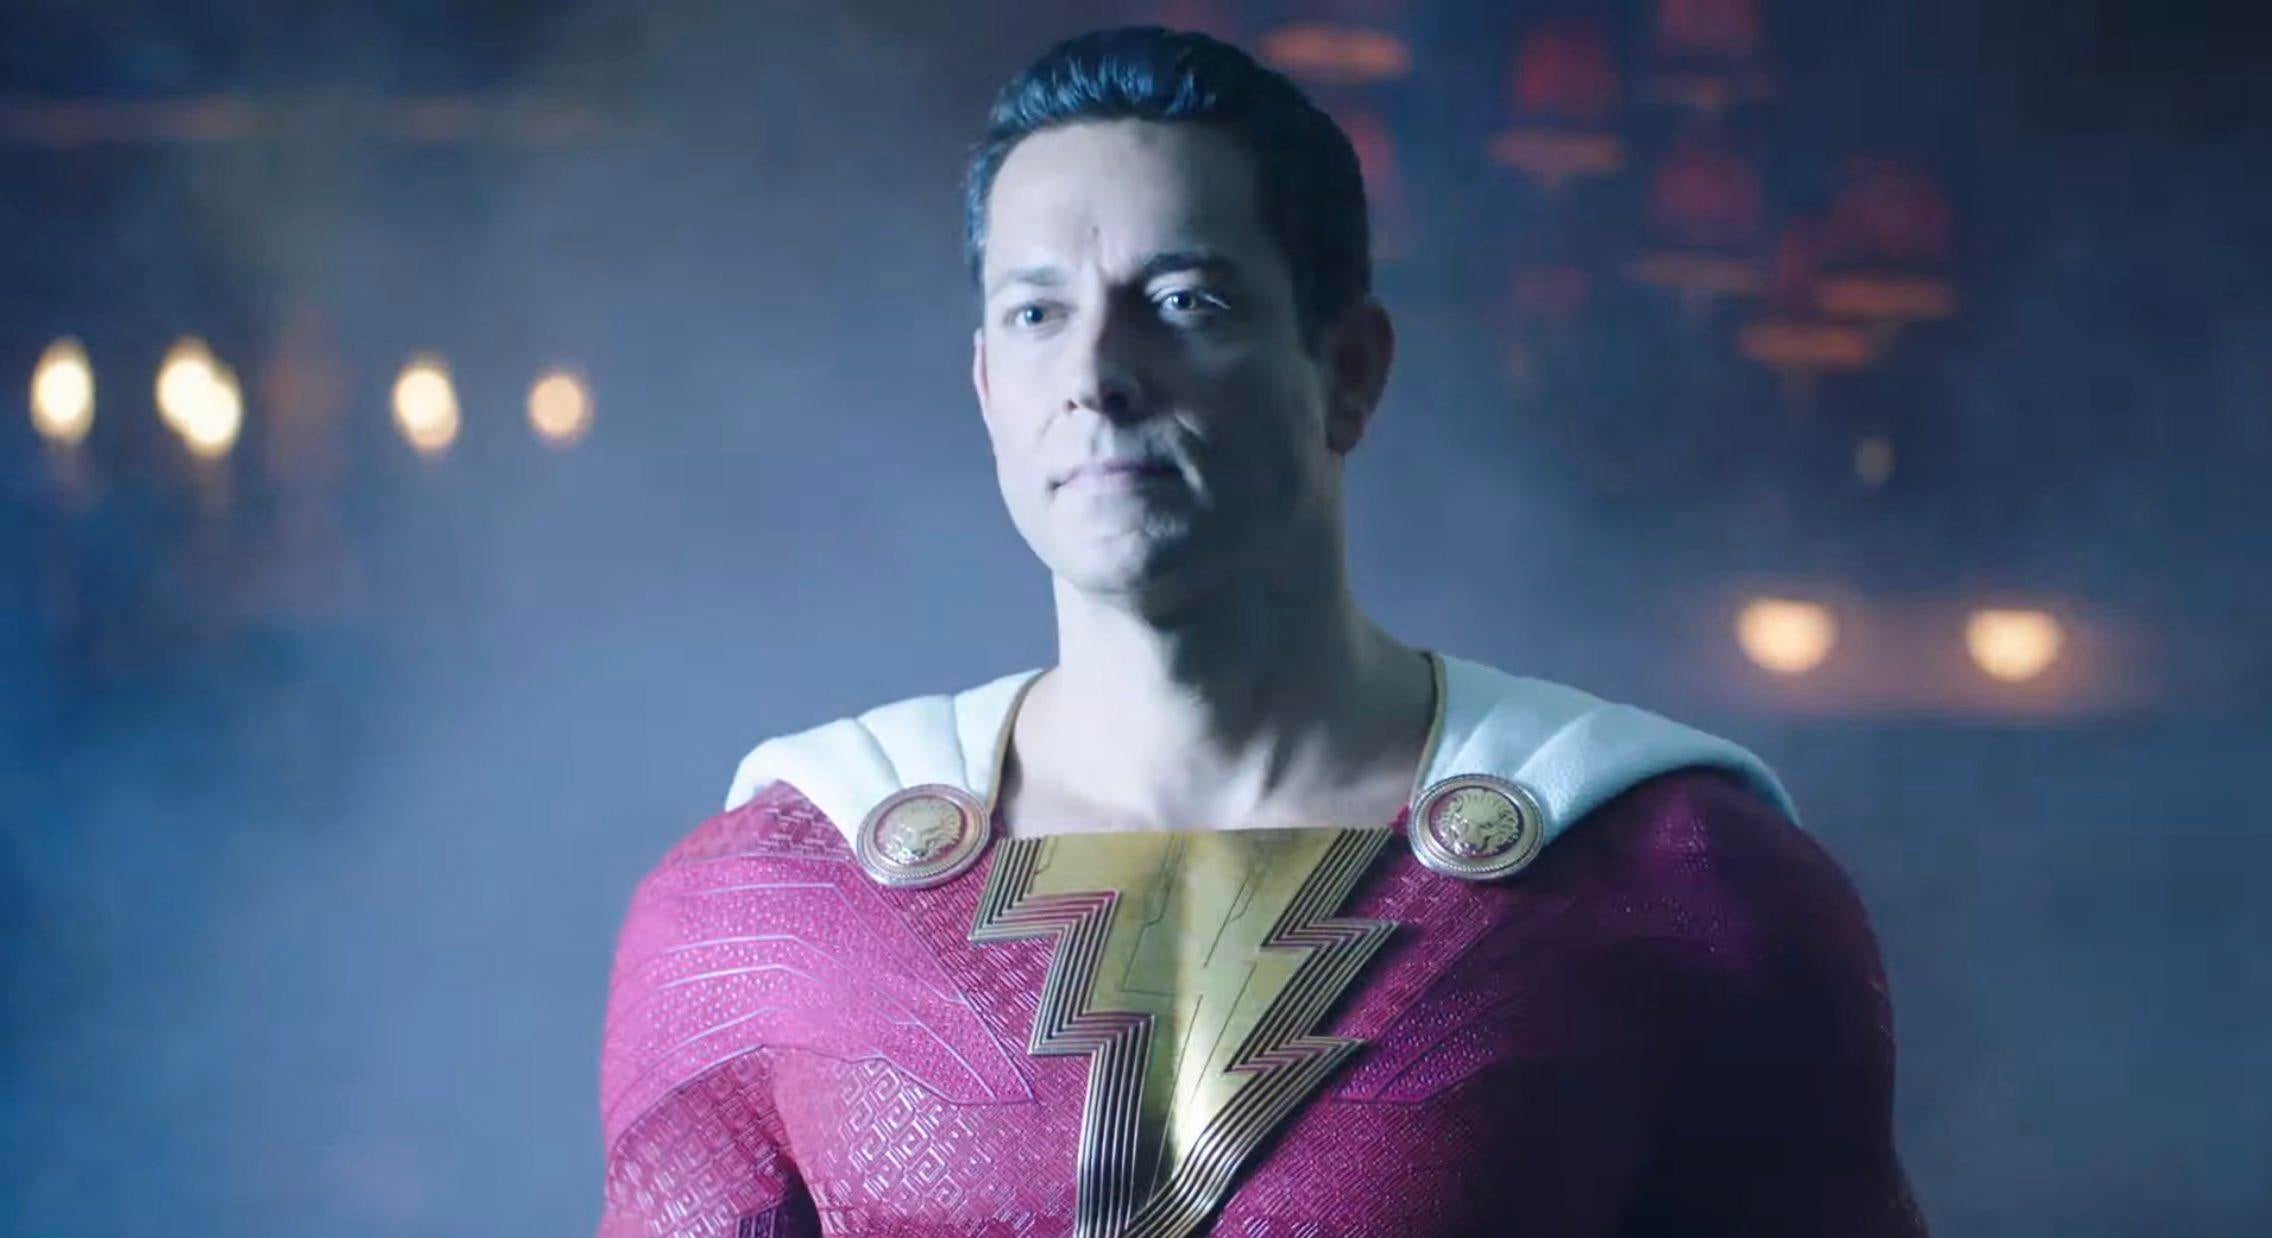 Shazam! Fury of the Gods Has Bigger Action, More Humor According to Producer